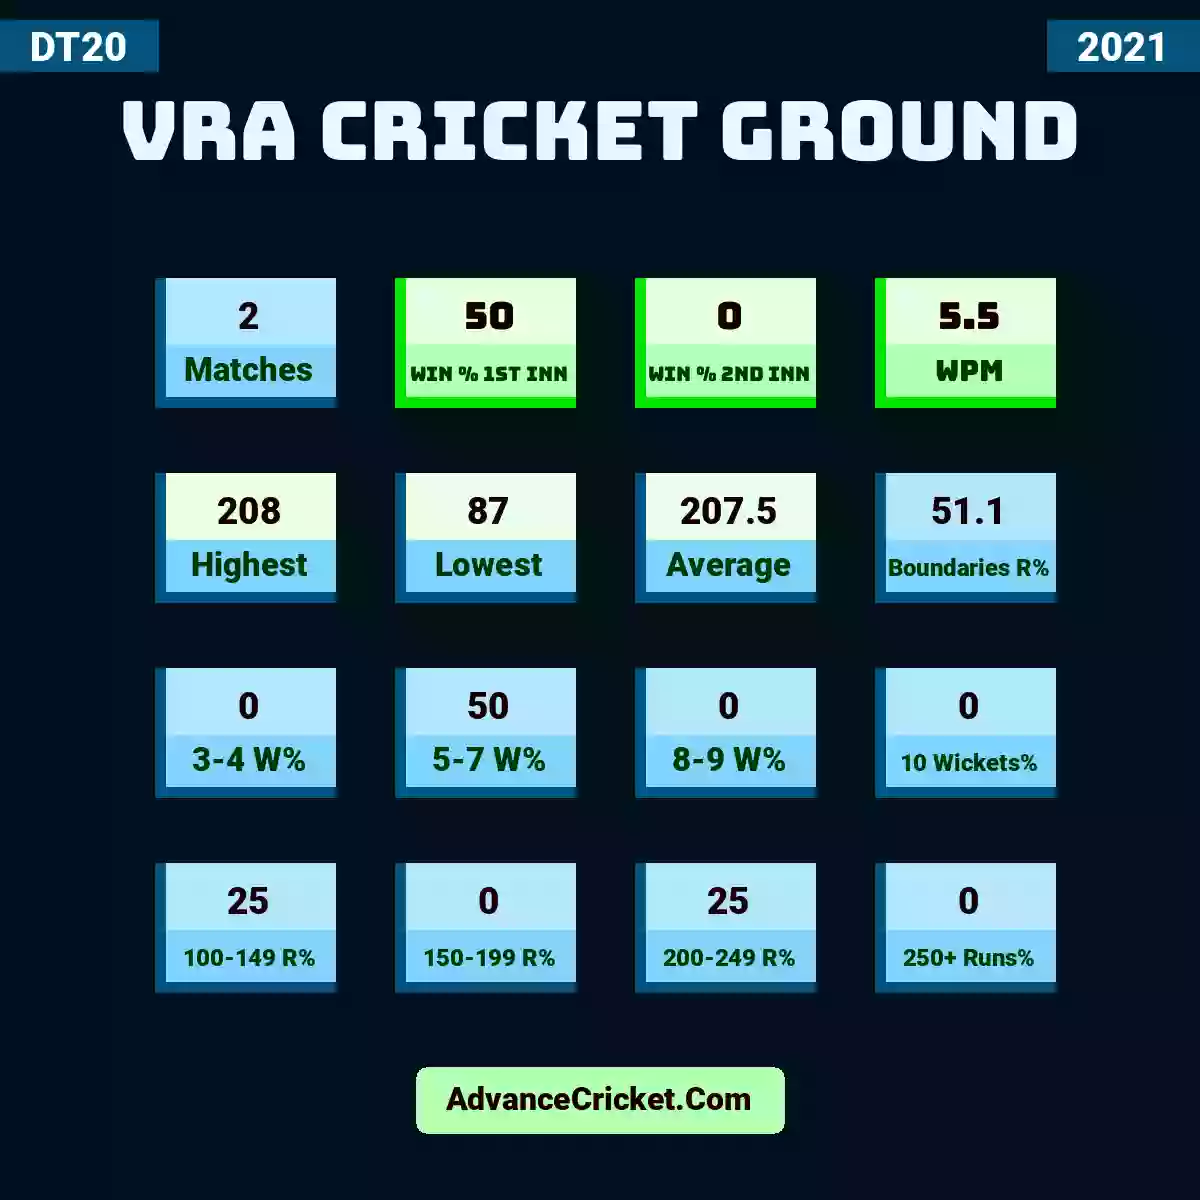 Image showing VRA Cricket Ground with Matches: 2, Win % 1st Inn: 50, Win % 2nd Inn: 0, WPM: 5.5, Highest: 208, Lowest: 87, Average: 207.5, Boundaries R%: 51.1, 3-4 W%: 0, 5-7 W%: 50, 8-9 W%: 0, 10 Wickets%: 0, 100-149 R%: 25, 150-199 R%: 0, 200-249 R%: 25, 250+ Runs%: 0.